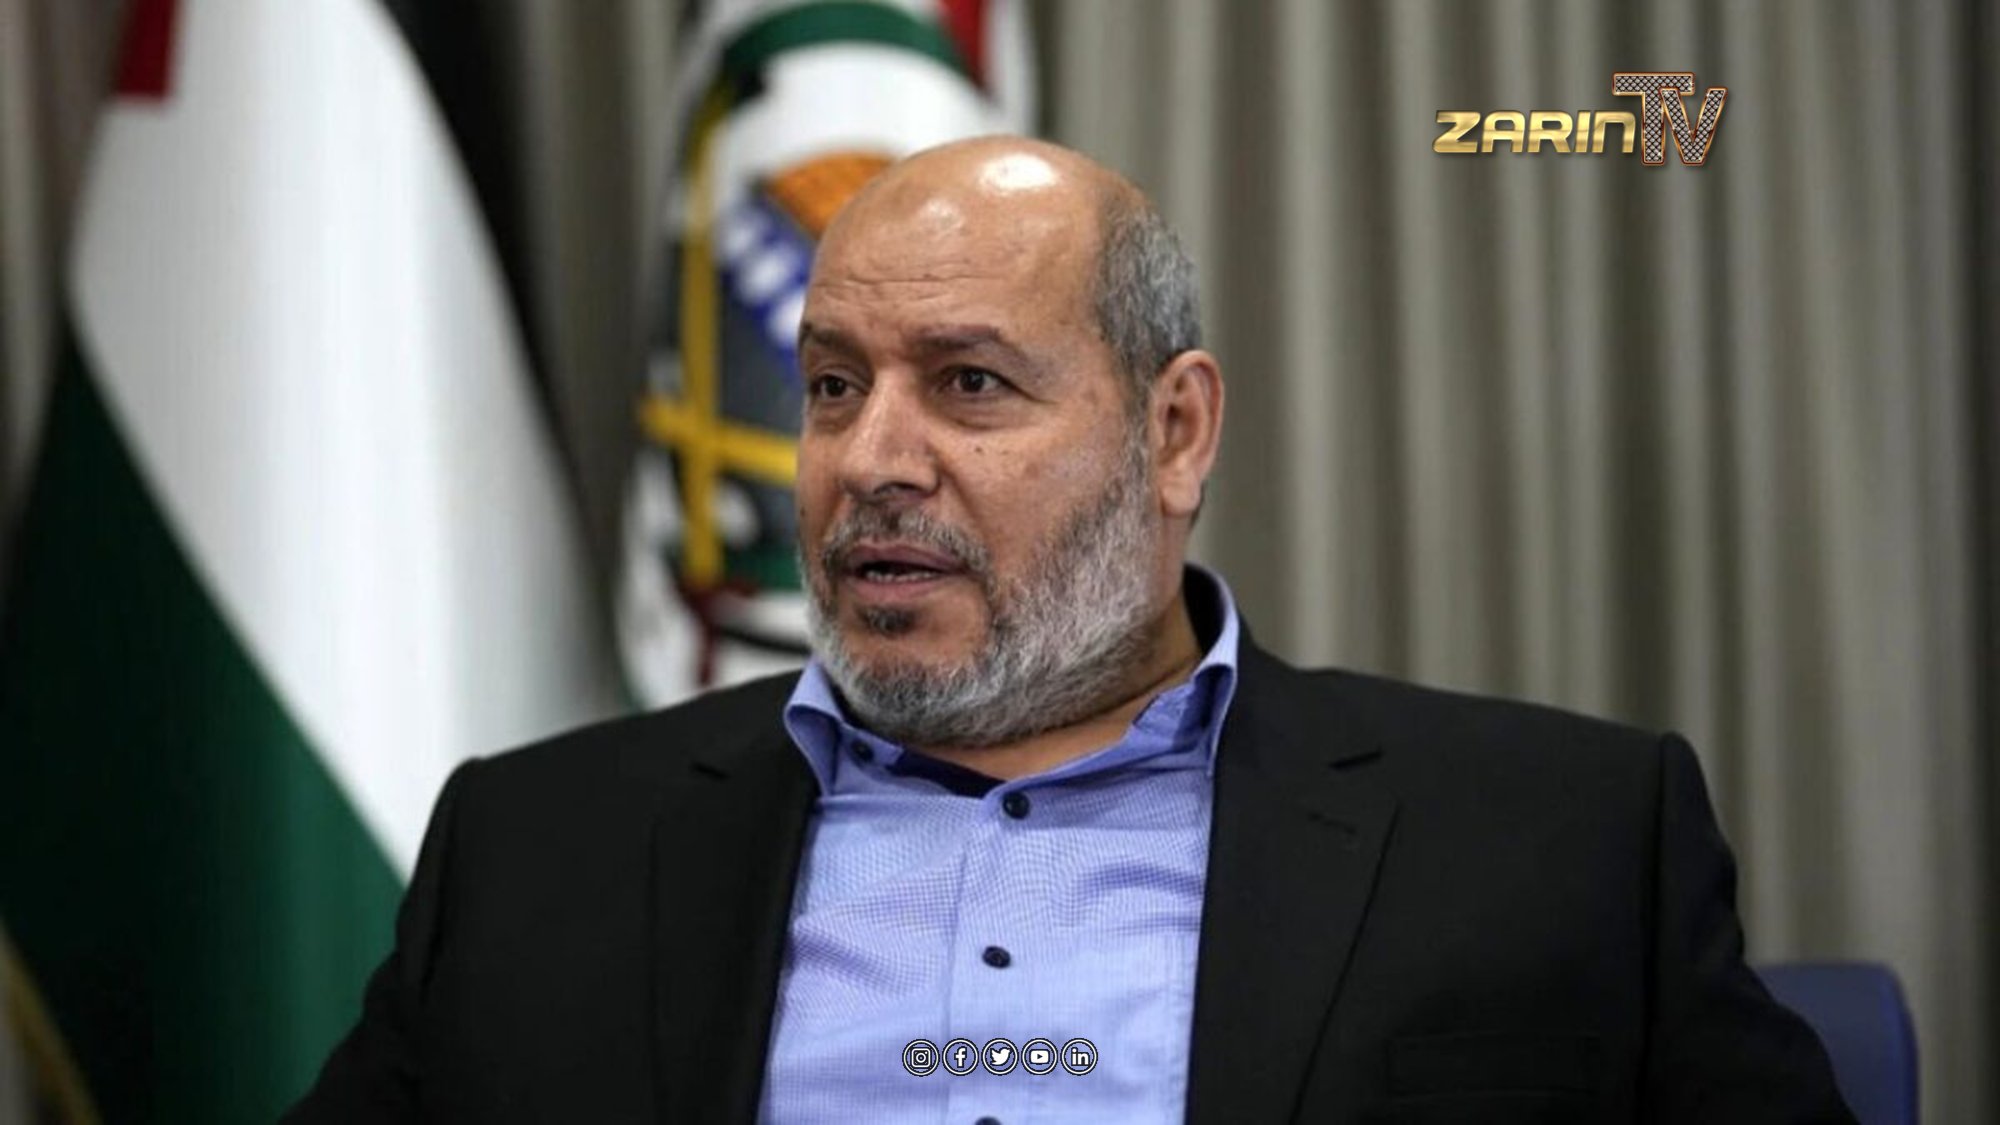 Hamas says that in response, Israel will explore the “ceasefire proposal”.